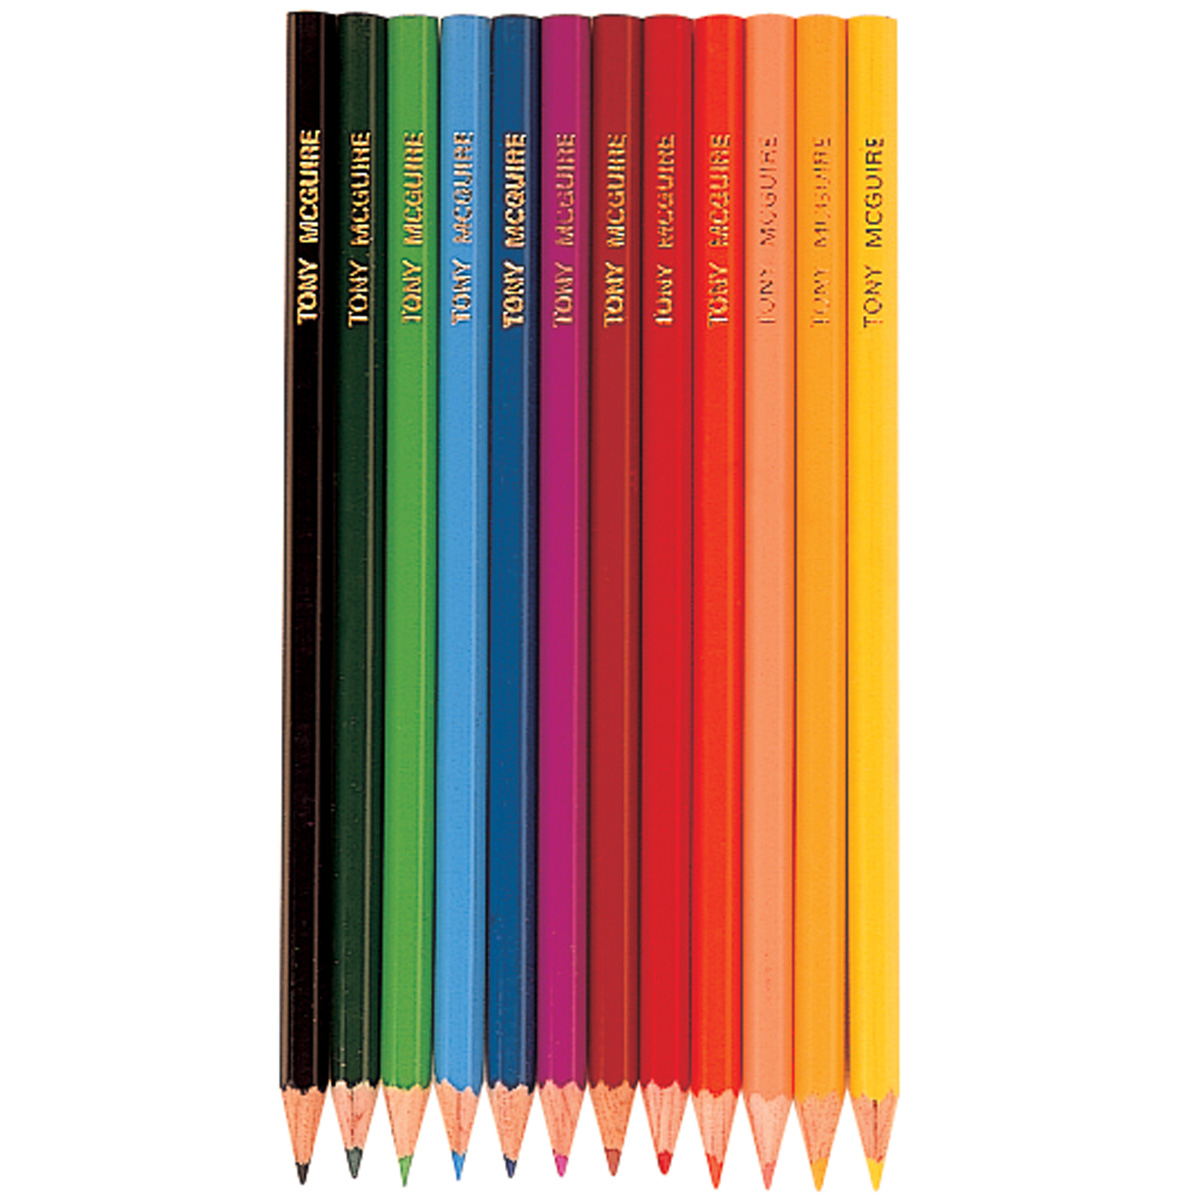 https://www.mulberrybush.co.uk/images/thumbs/0000176_12-personalised-colouring-pencils.jpg